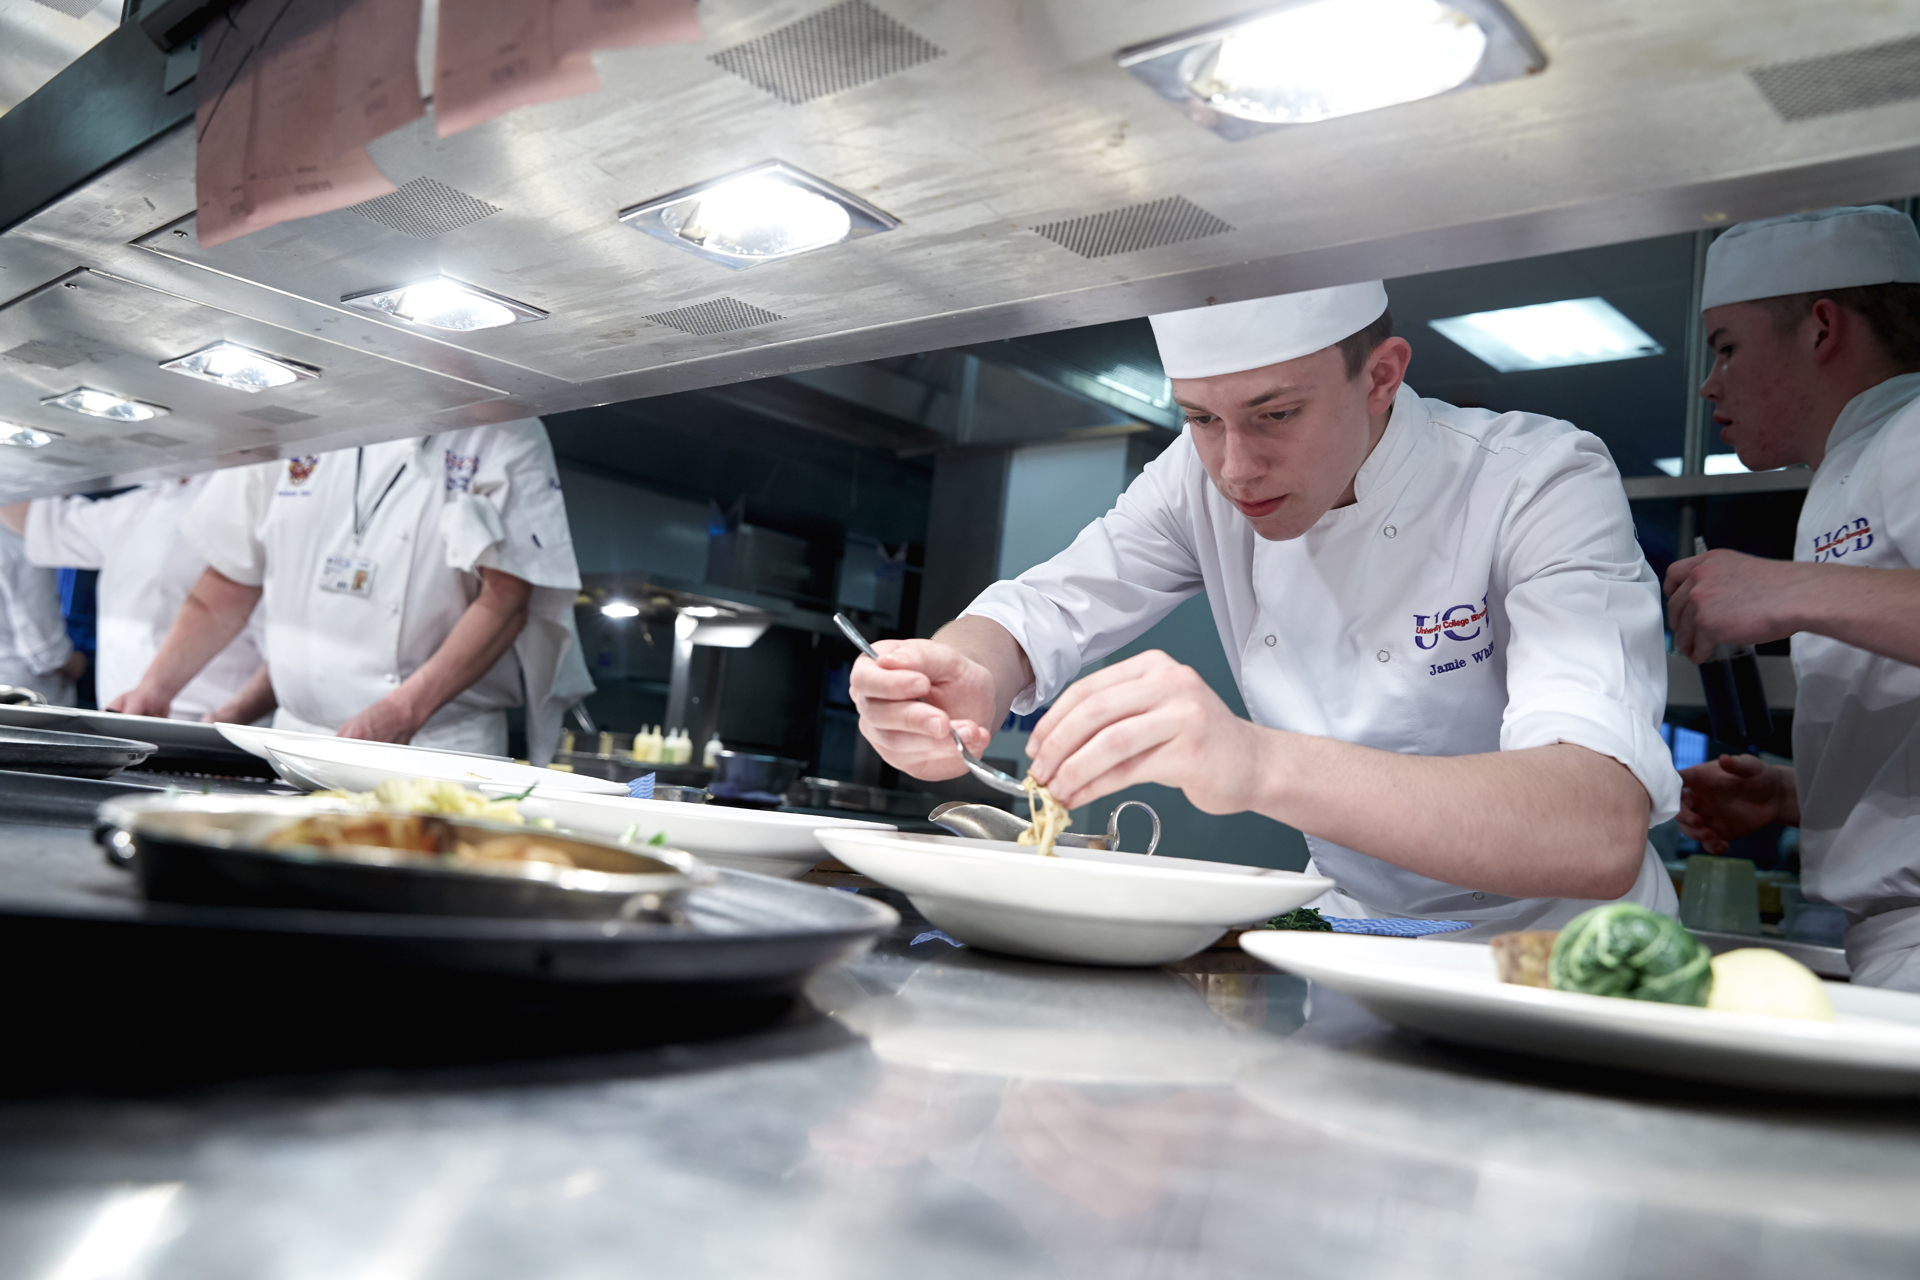 Chef Cookery Courses Level 2 And Level 3 Professional Cookery Ucb University College Birmingham